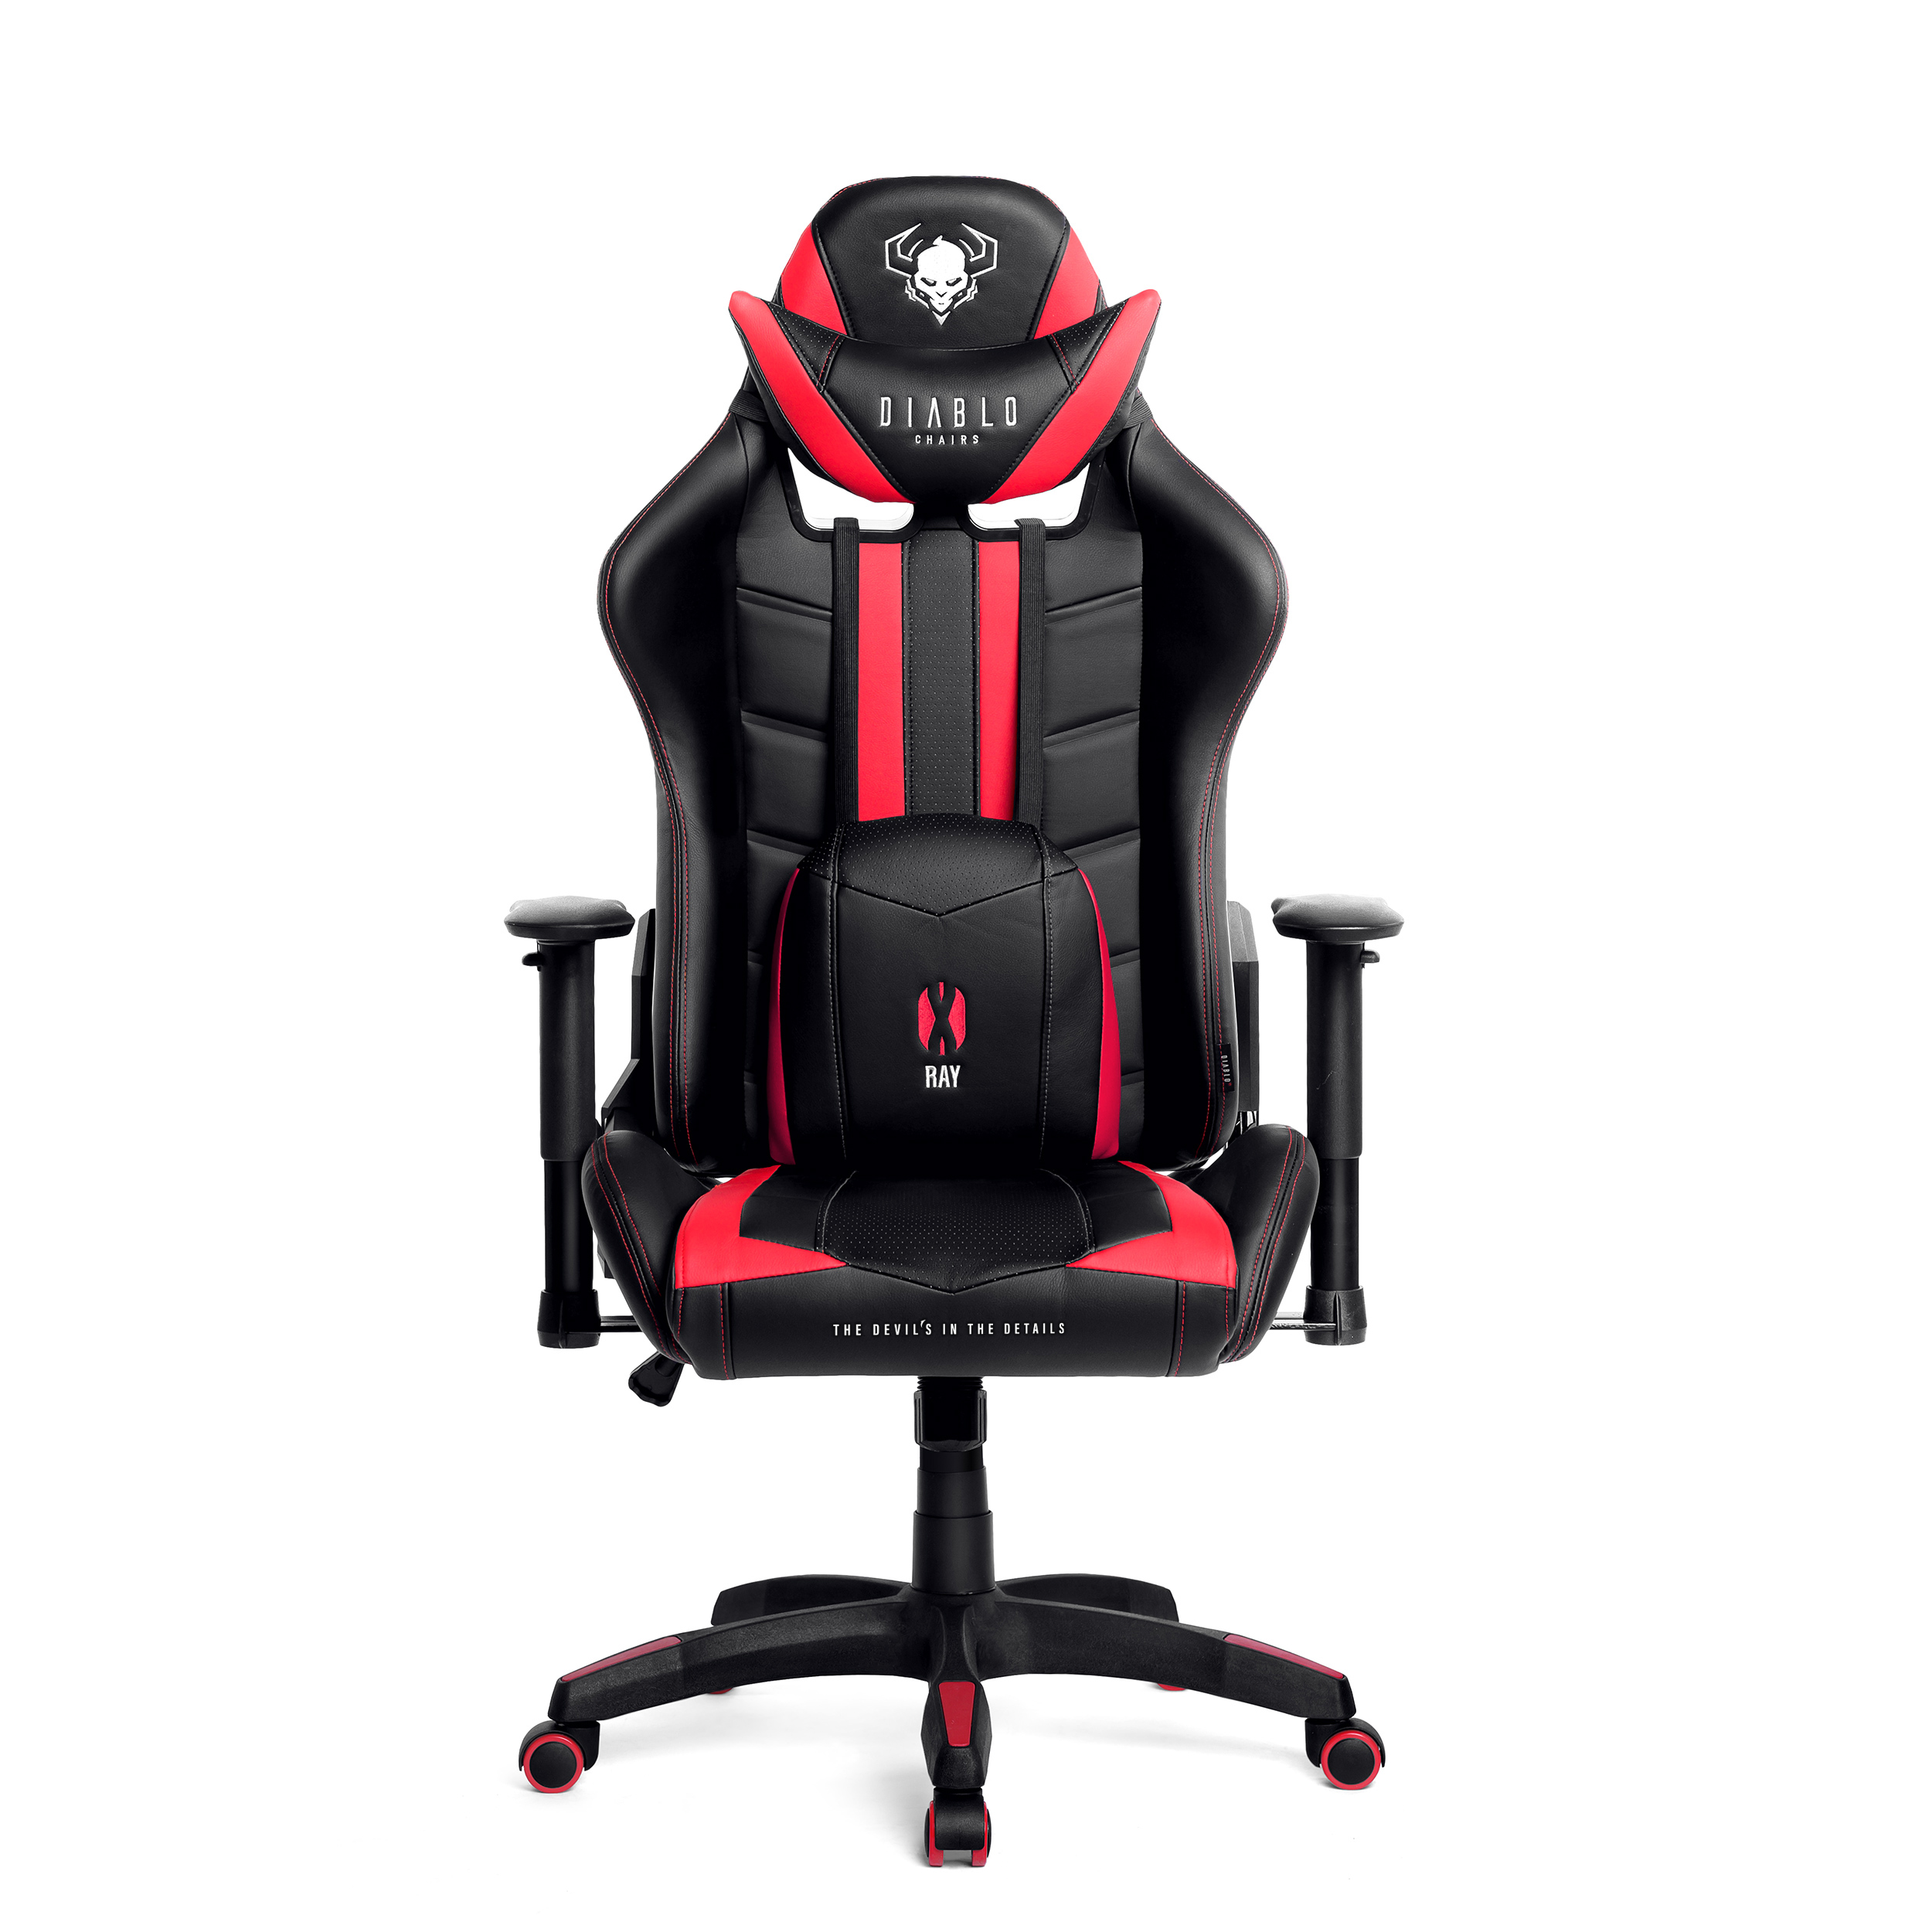 DIABLO NORMAL STUHL CHAIRS black/red Gaming GAMING Chair, X-RAY